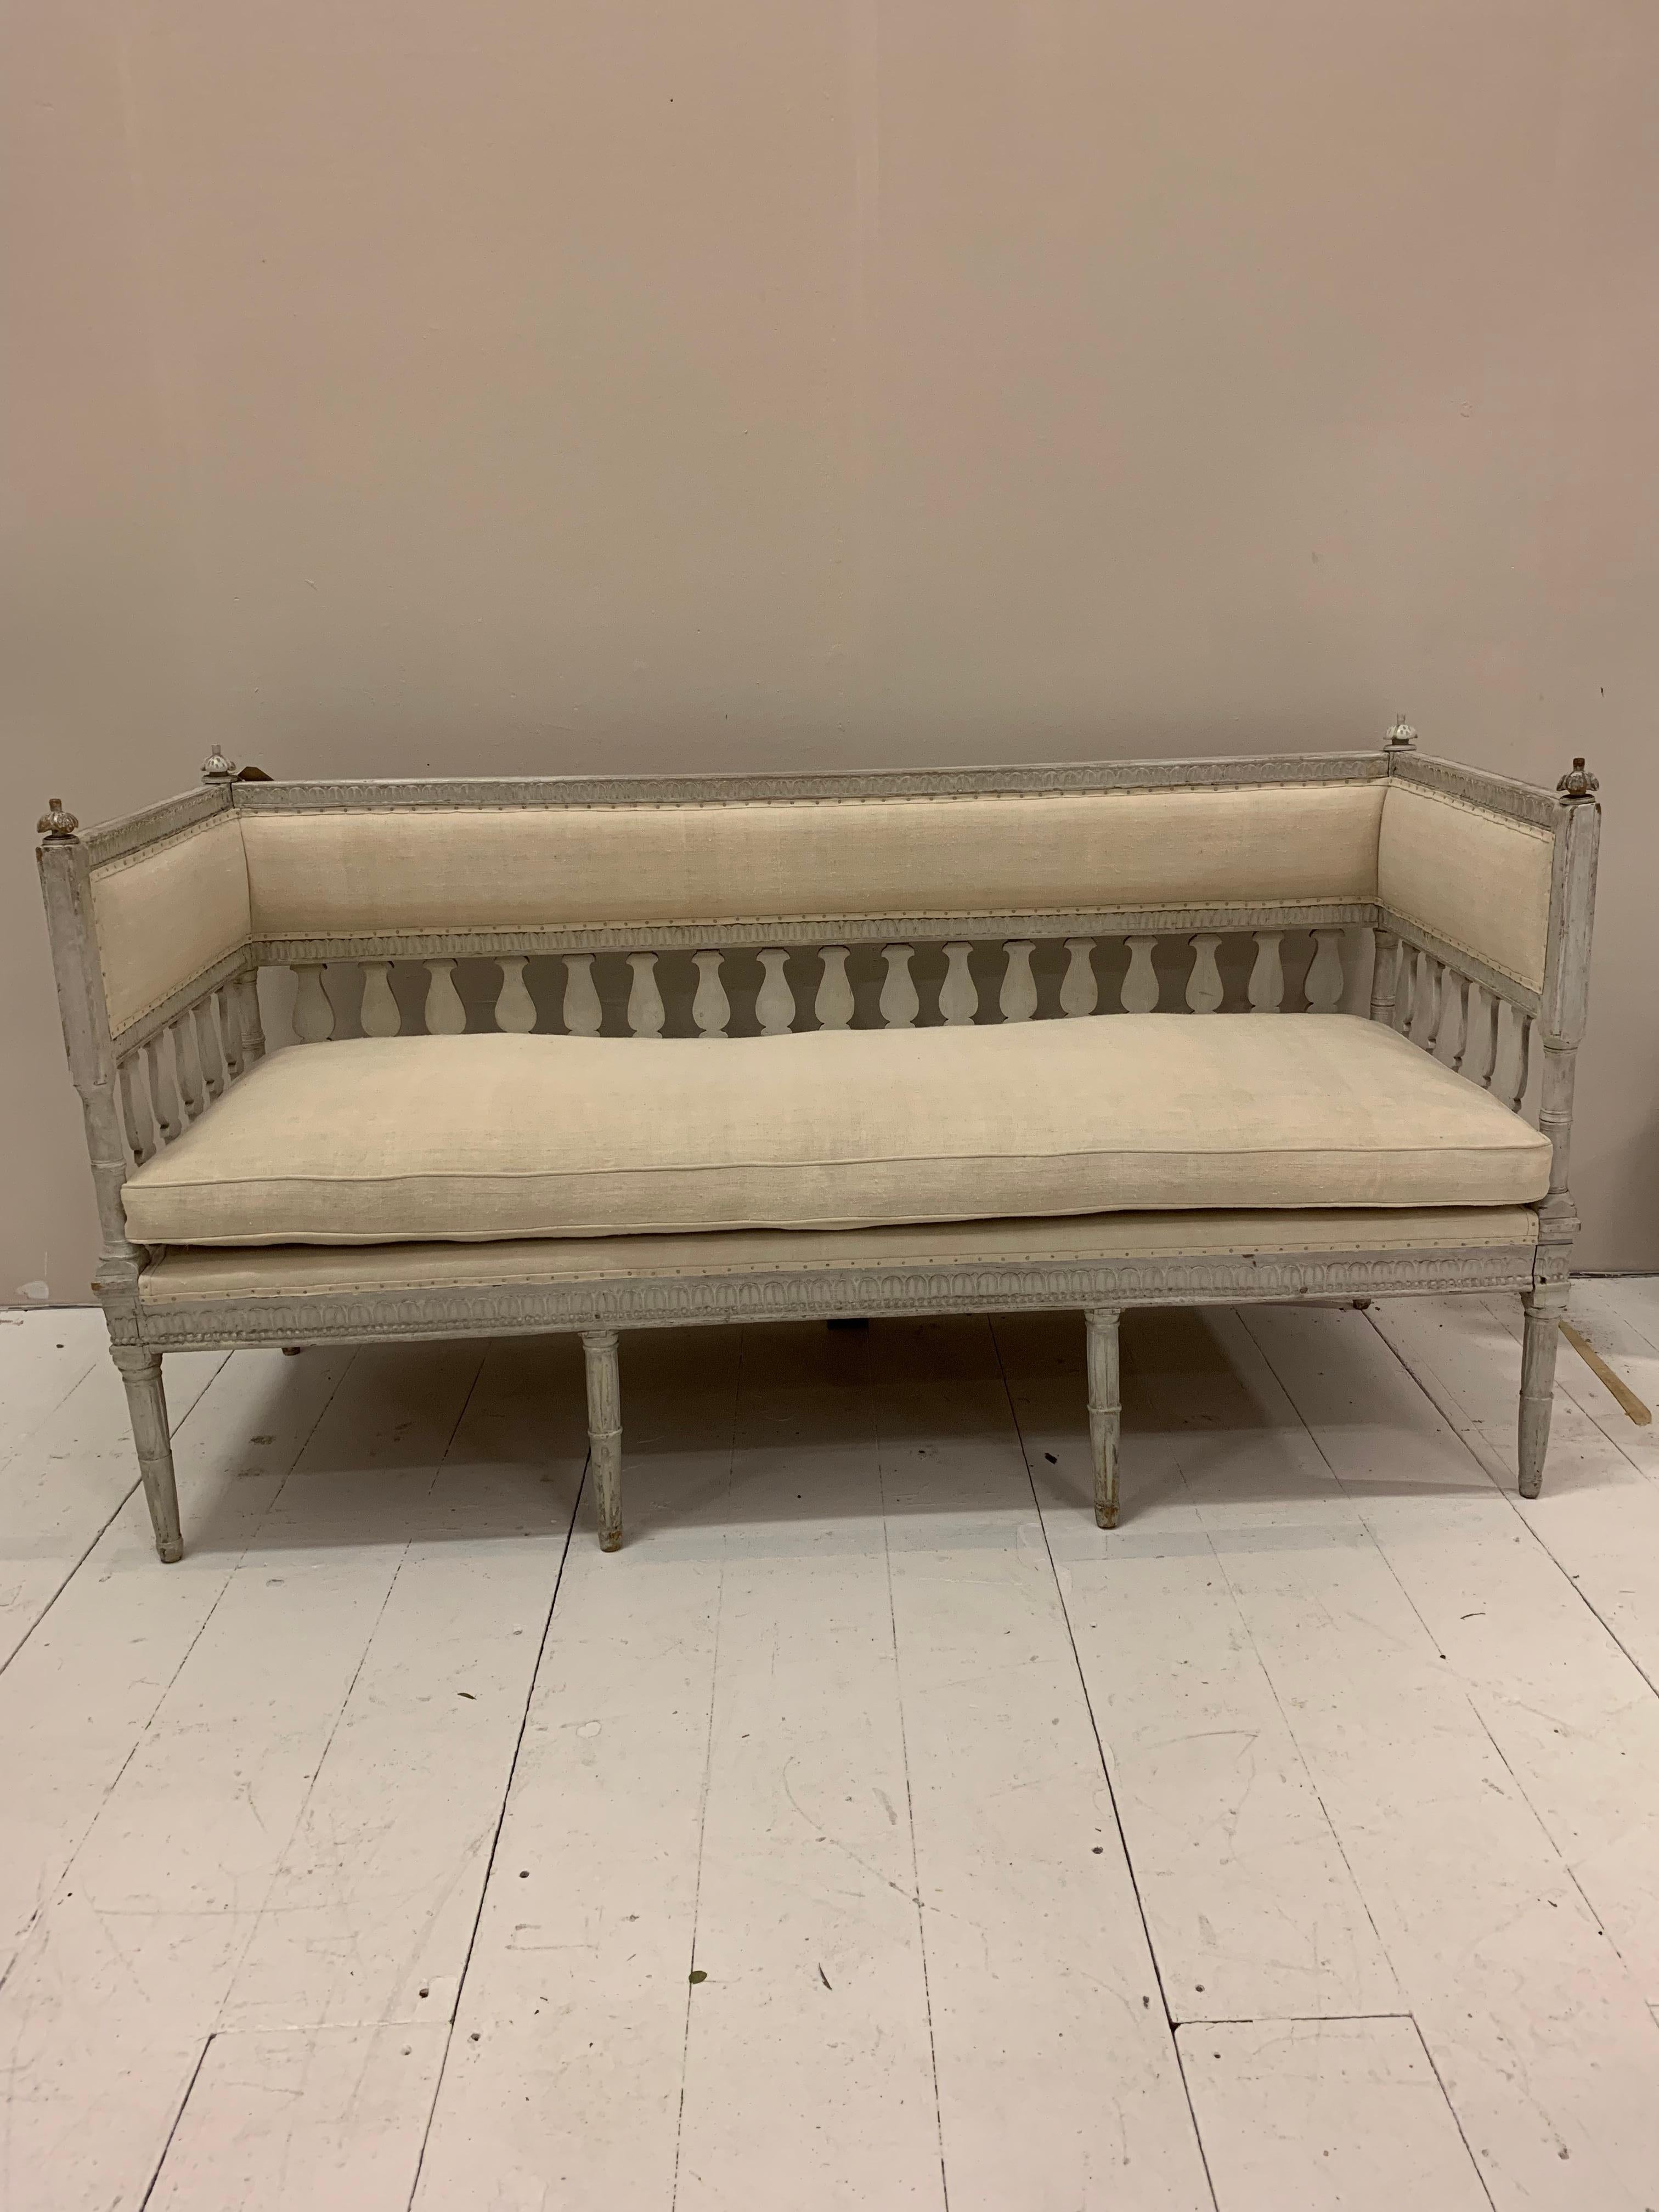 Early 19th century painted Swedish sofa.
This charming piece in Gustavian style has decorative detail to the front and sides.
Open stylish stick back with decorative finals to the top.
(Back two replaced)
It has been repainted over time to a